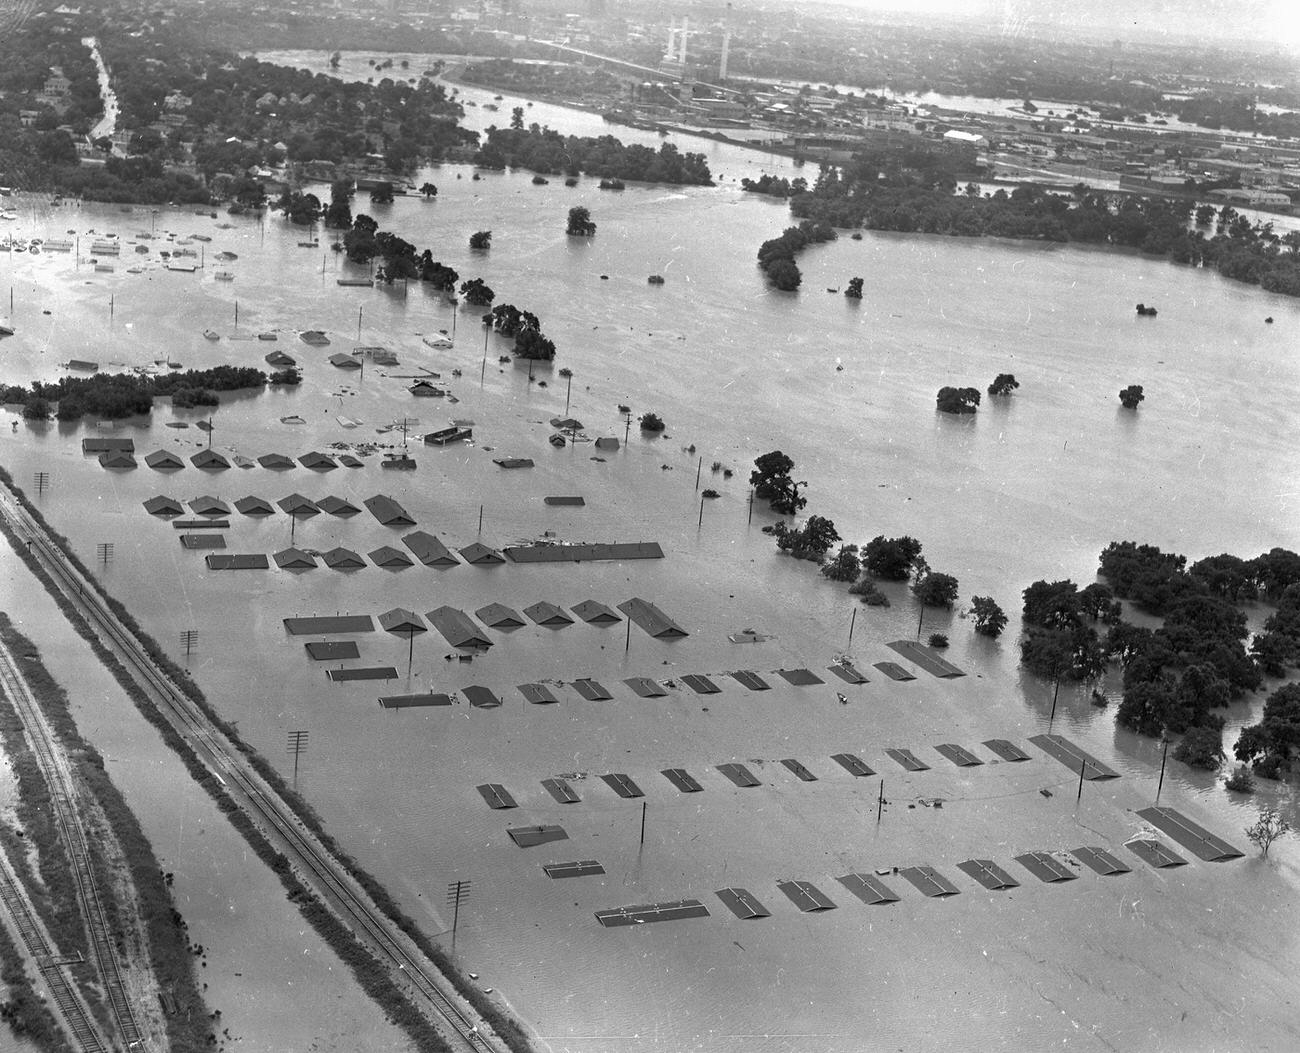 Fort Worth, Texas, flood of 1949, showing a submerged neighborhood of homes. Downtown Fort Worth is visible in the distance.